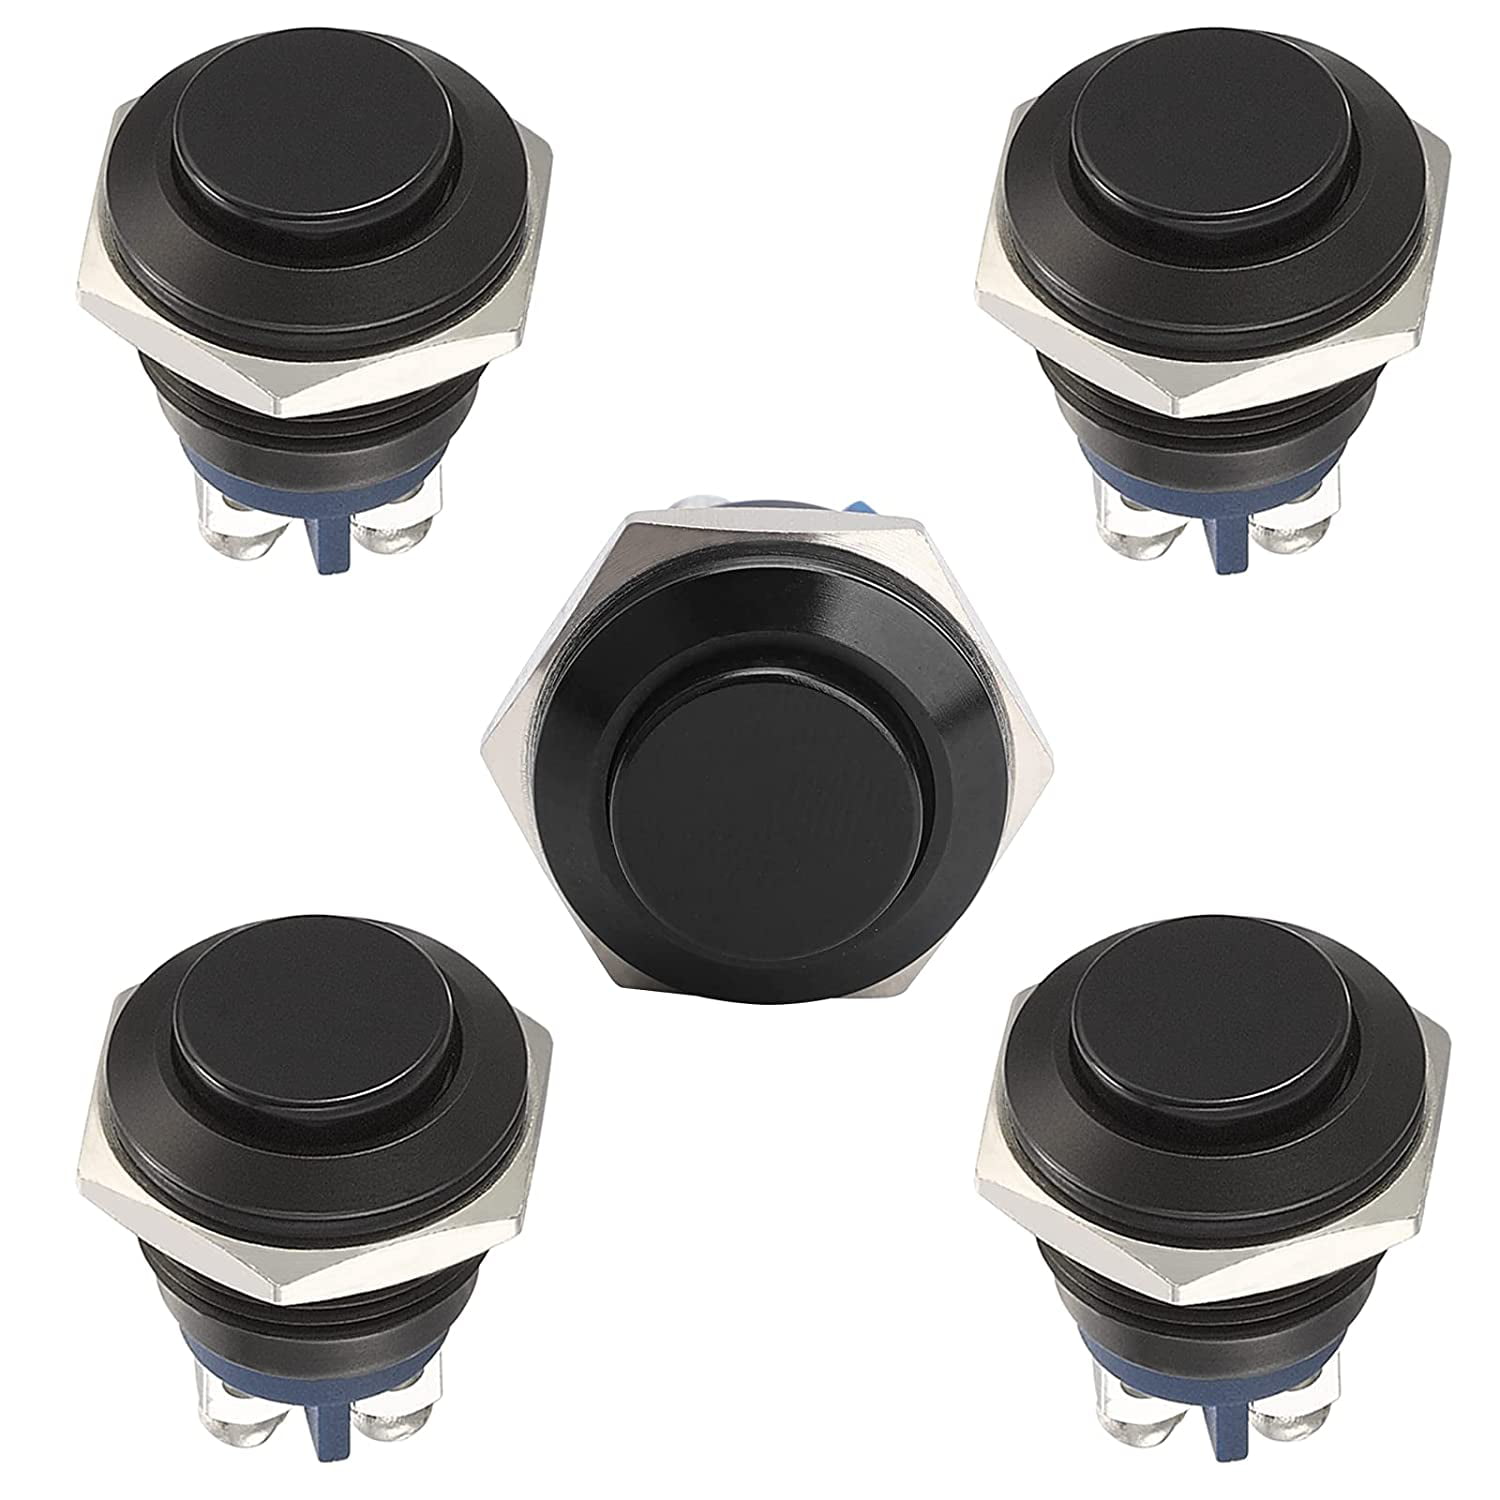 IP65 Waterproof Push Button Switch,Stainless Steel 1 Normally Open Without LED. Starelo 5pcs 12mm Momentary Push Button Switch Silver Shell with pre-Wiring